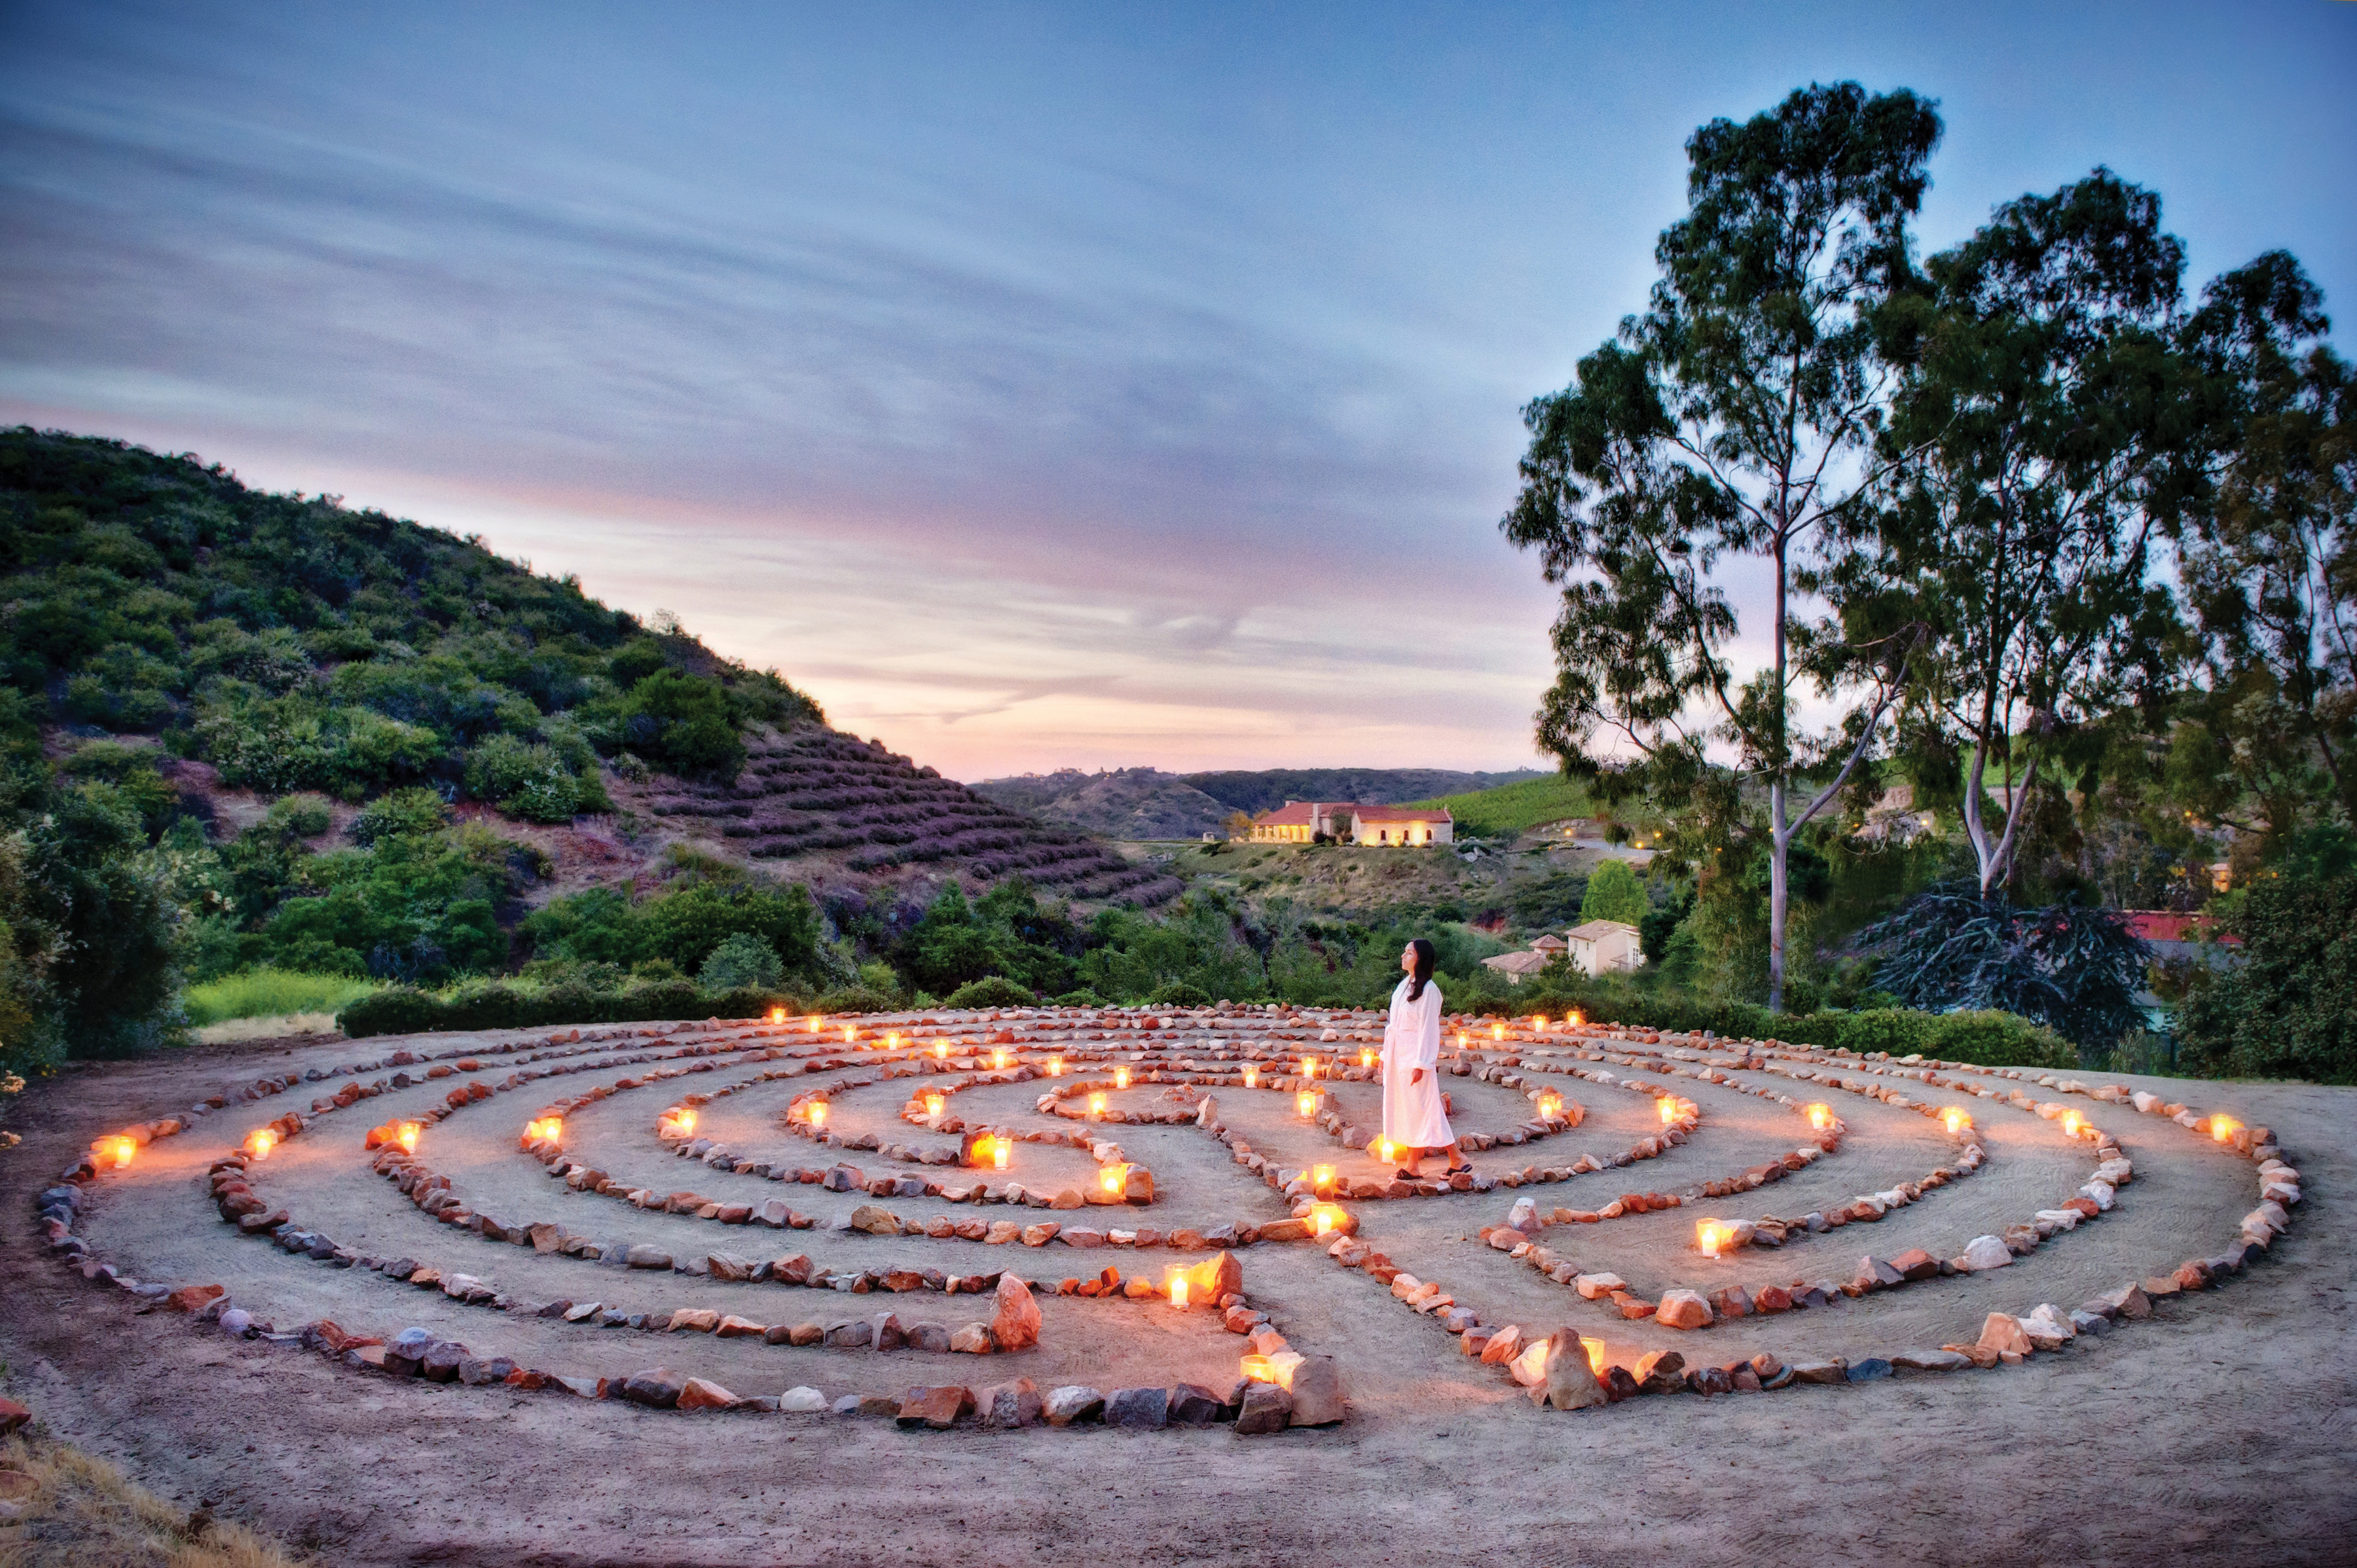 labyrinth meditation made of rocks with candles in a green valley